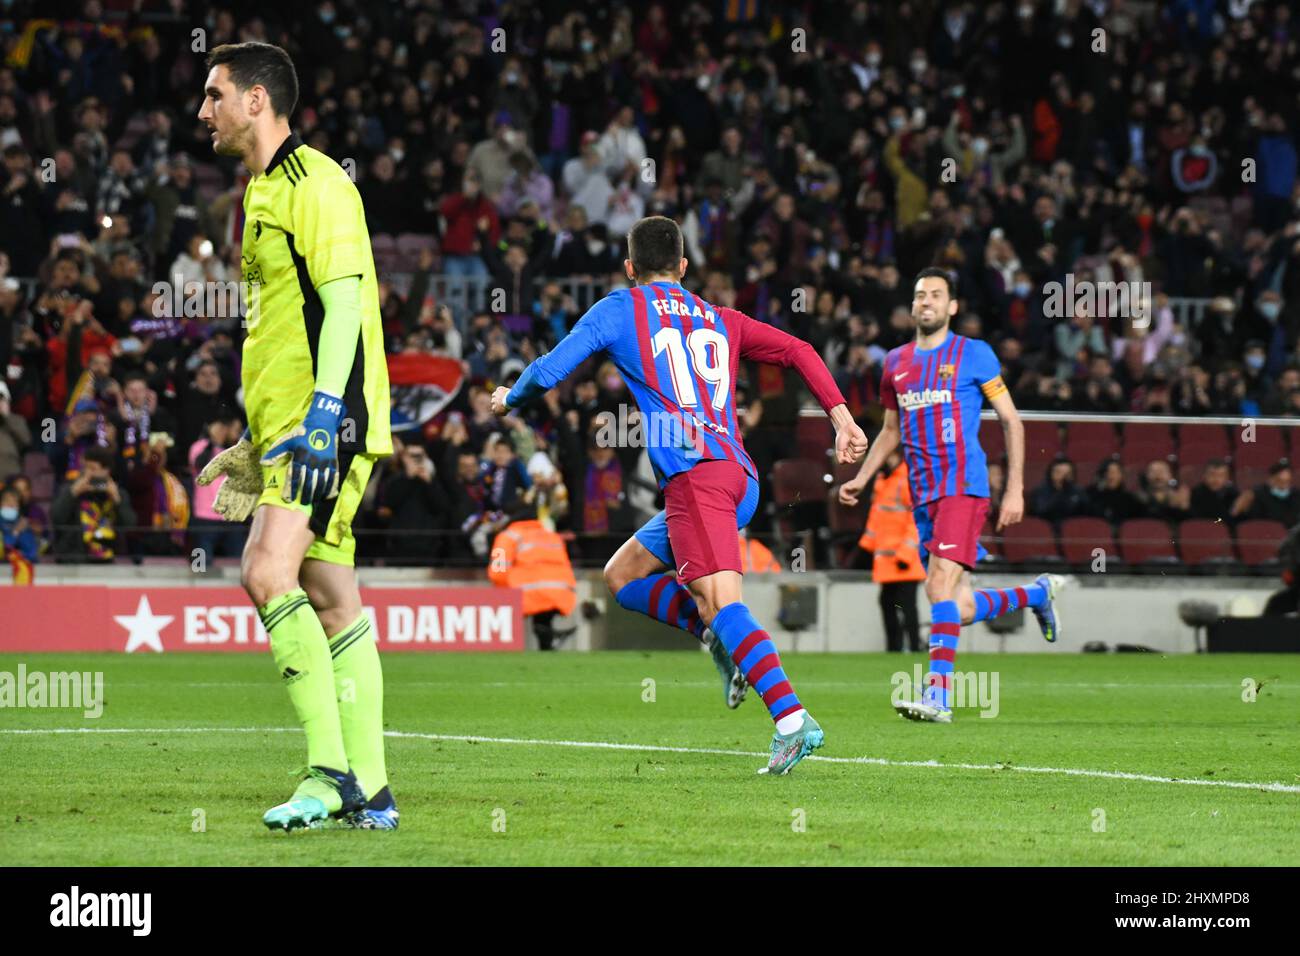 BARCELONA, SPAIN - MARCH 13: Ferran Torres of Barcelona celebrates after scoring a goal (1-0) during La Liga match between Barcelona and Osasuna at Camp Nou stadium on March 13, 2022 in Barcelona, Spain. (Photo by Sara Aribó/Pximages) Stock Photo